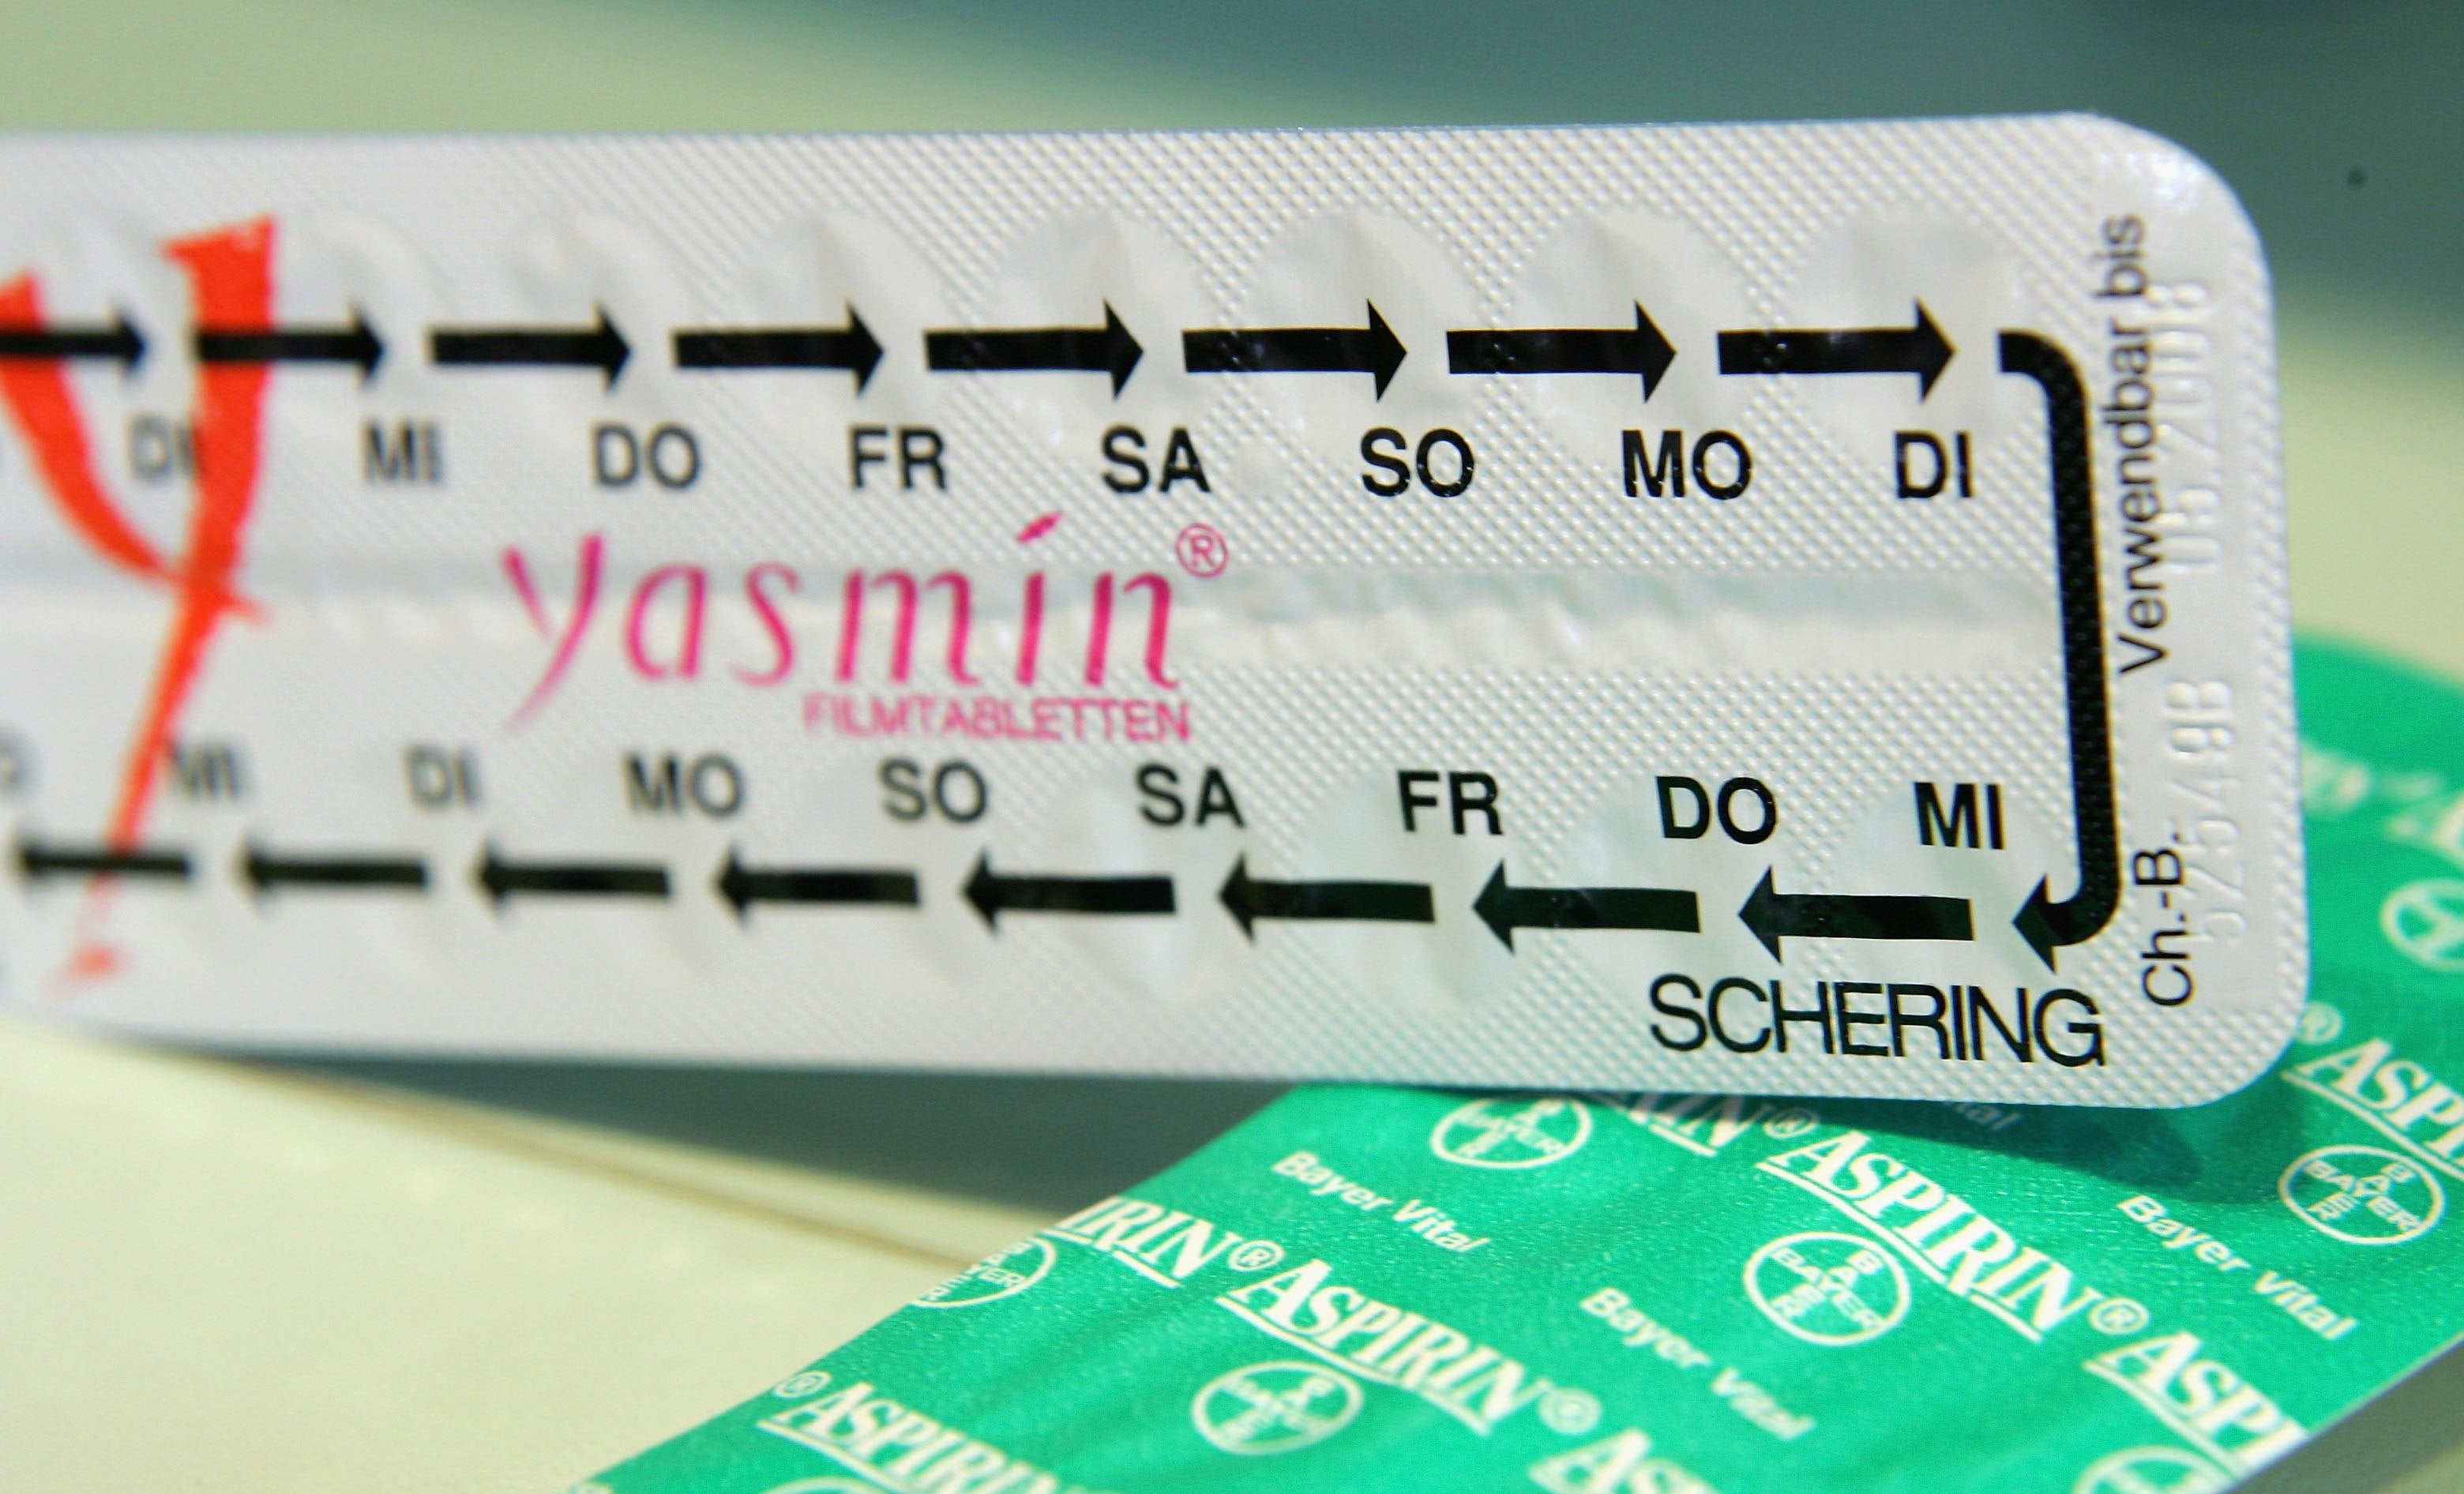 Packages of Bayer aspirin and Schering Yasmin contraceptive pills lie on a table at a pharmacy on 24 March, 2006 in Berlin, Germany. Concerns have been raised around why birth control pills are not safer, given the risk of blood clotting and other side effects.